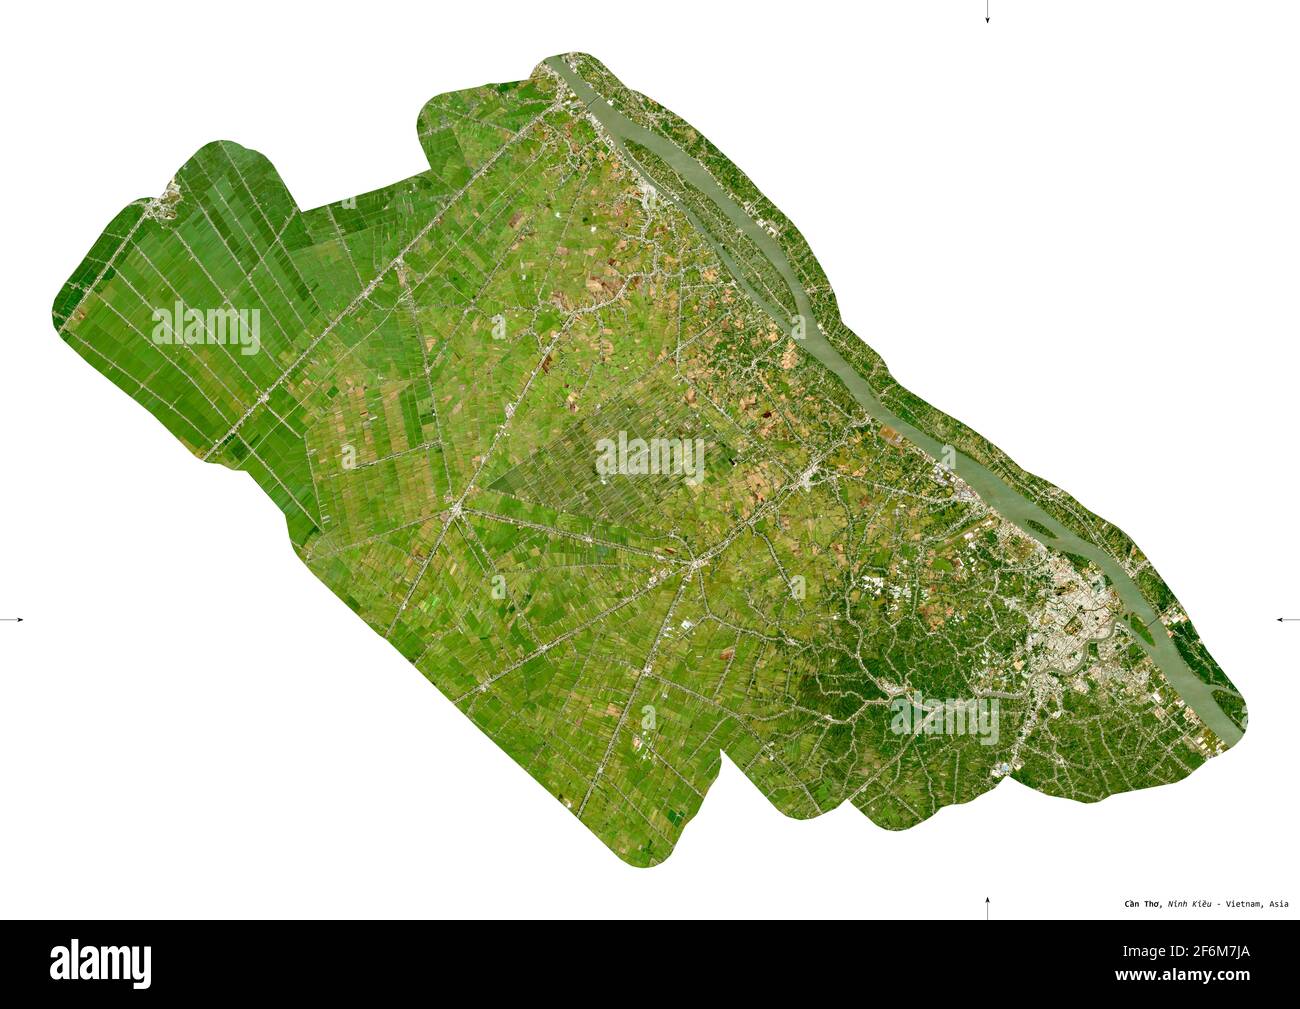 Can Tho, city|municipality|thanh pho of Vietnam. Sentinel-2 satellite imagery. Shape isolated on white. Description, location of the capital. Contains Stock Photo